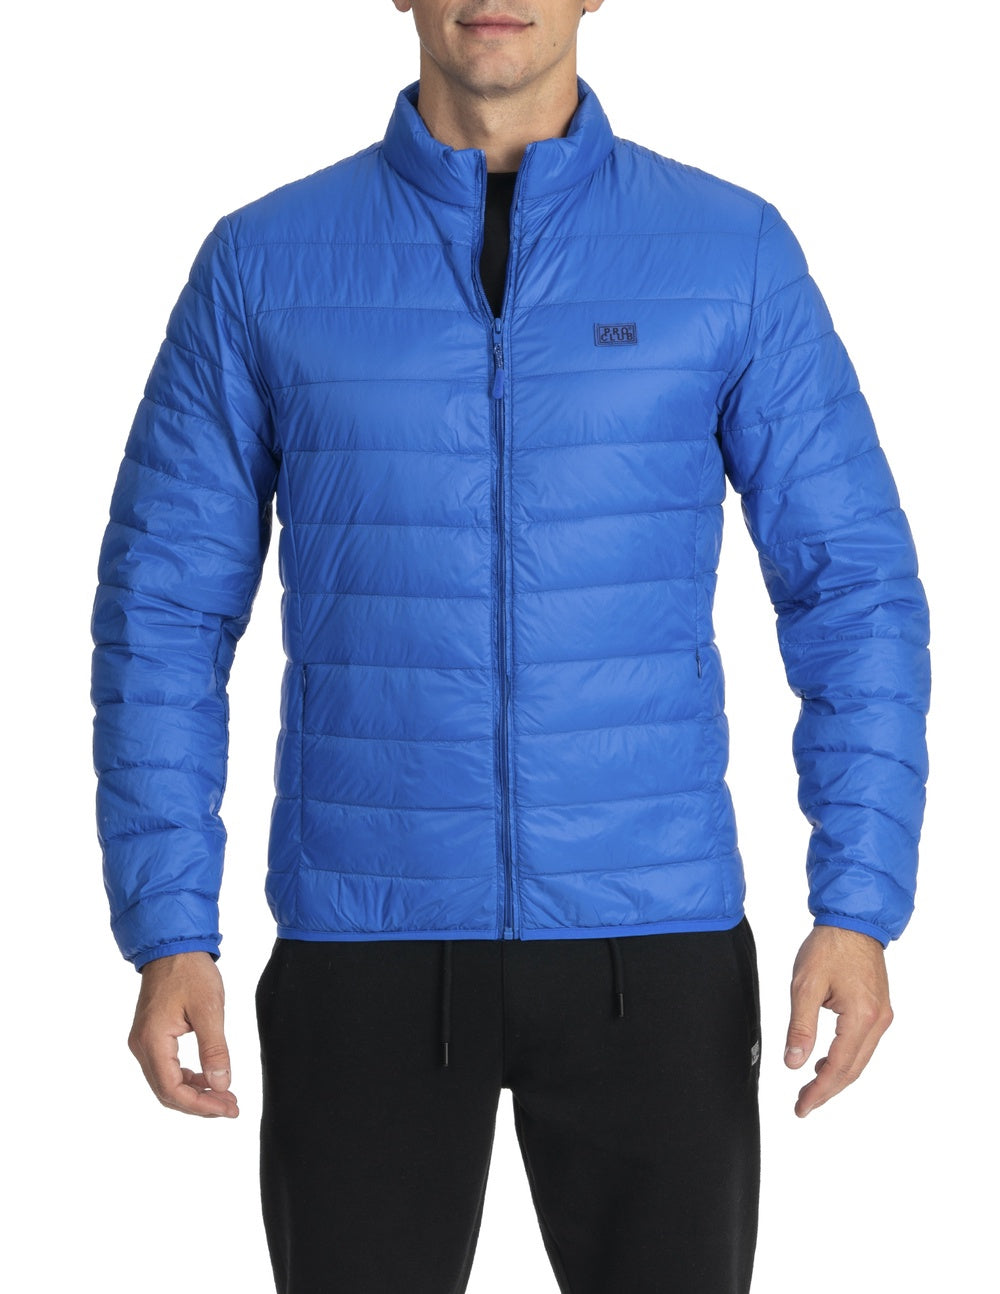 Pro Club Packable Lightweight Down Jacket - ROYAL